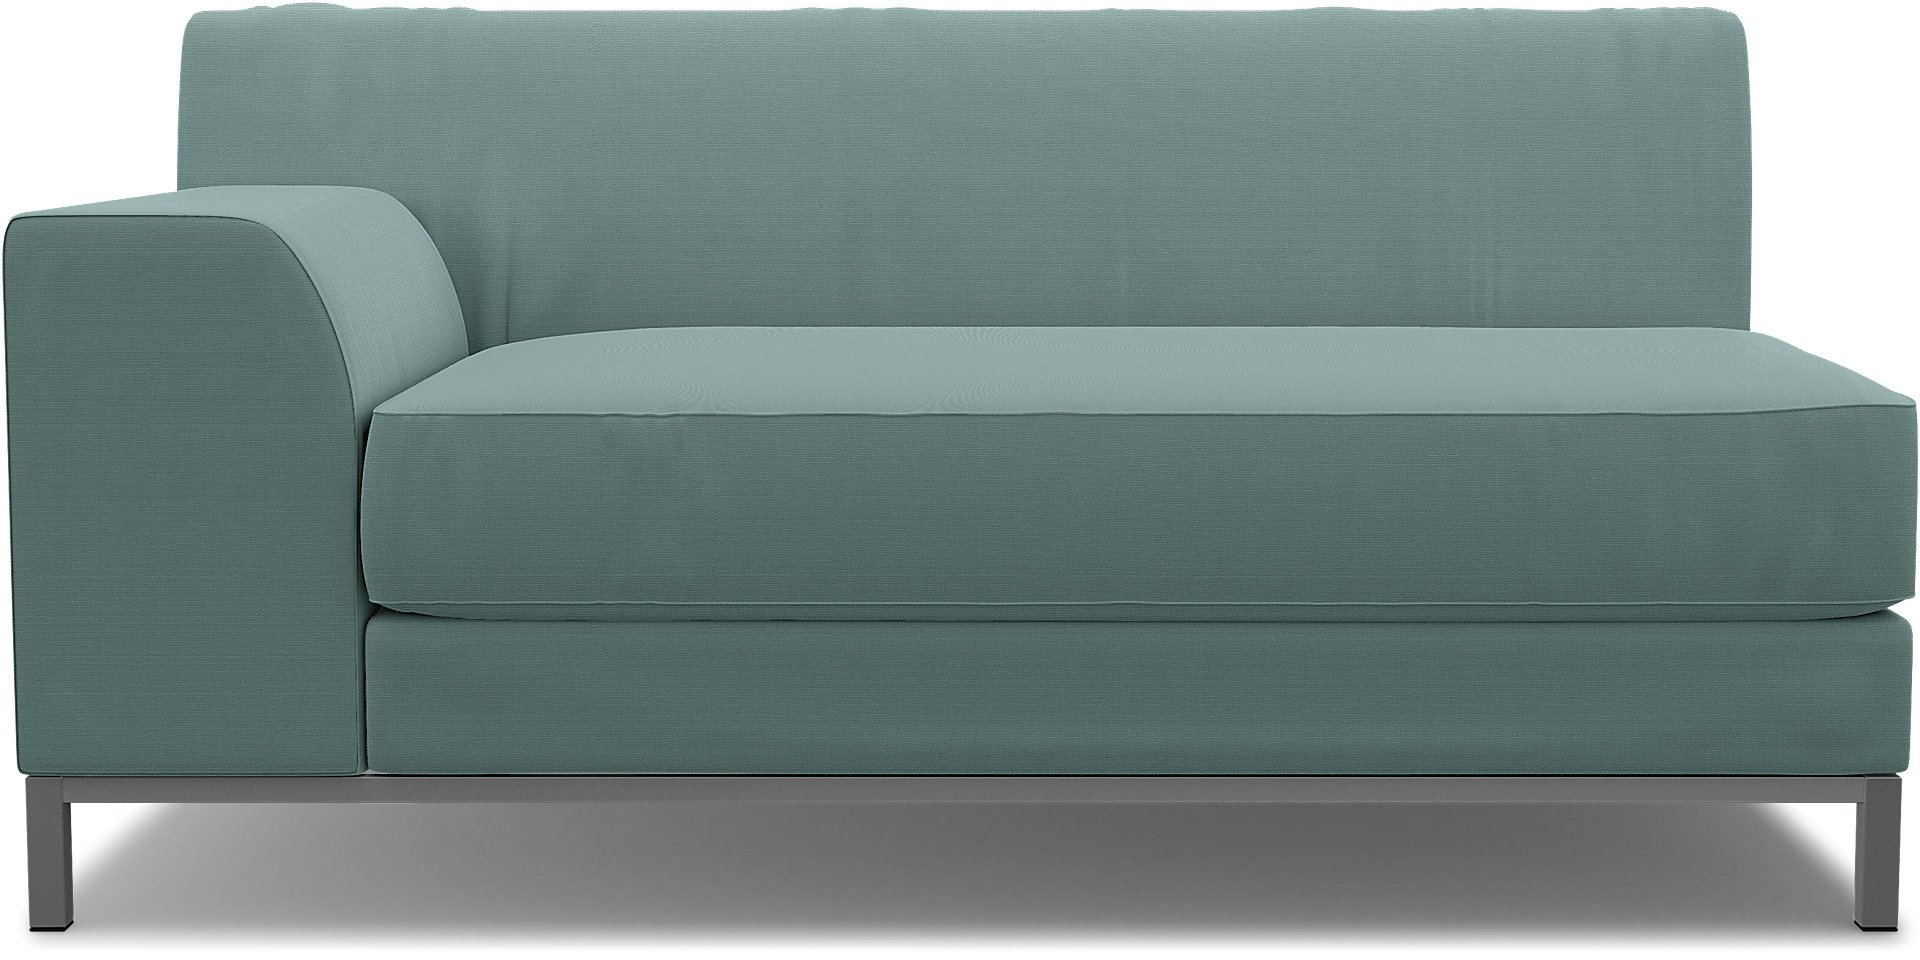 IKEA - Kramfors 2 Seater Sofa with Left Arm Cover, Mineral Blue, Cotton - Bemz